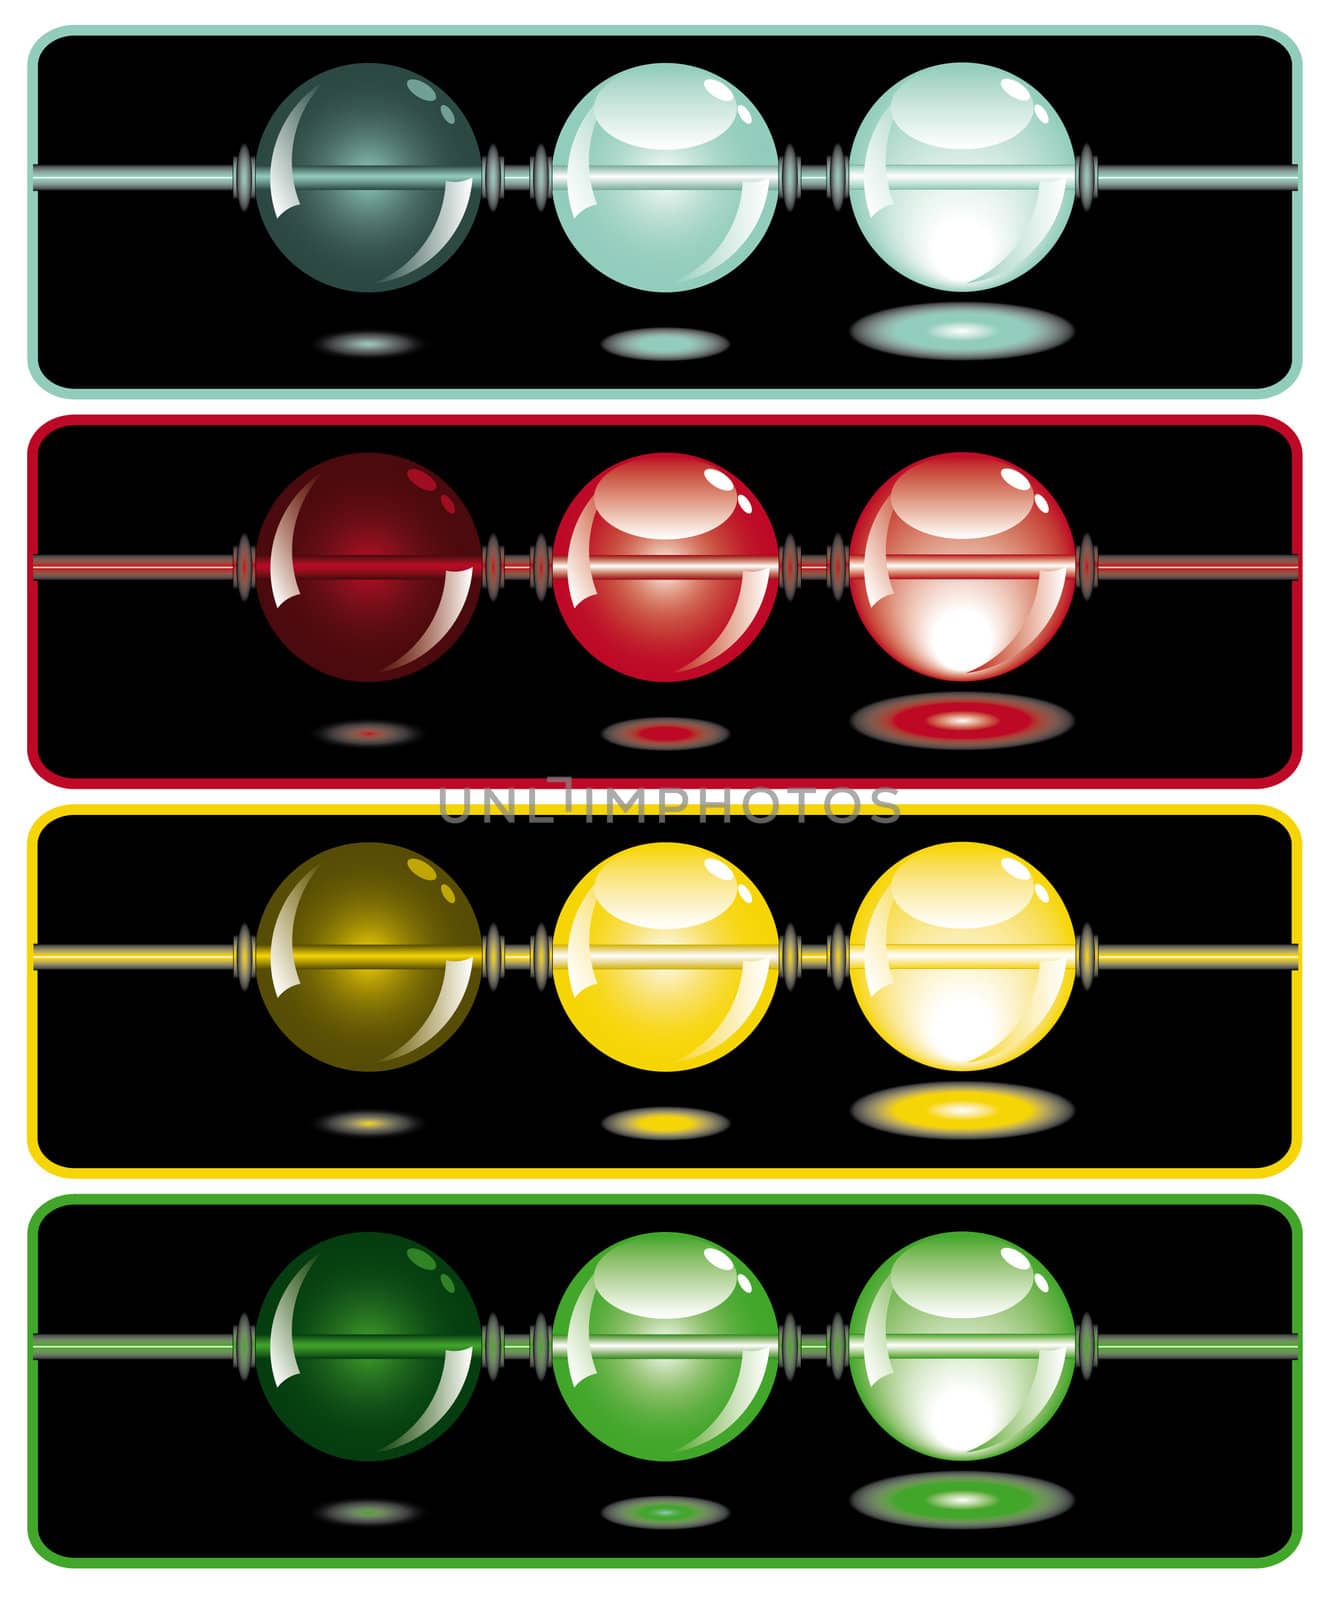 glowing beads in the dark from dark to light in four rows usable as web button
